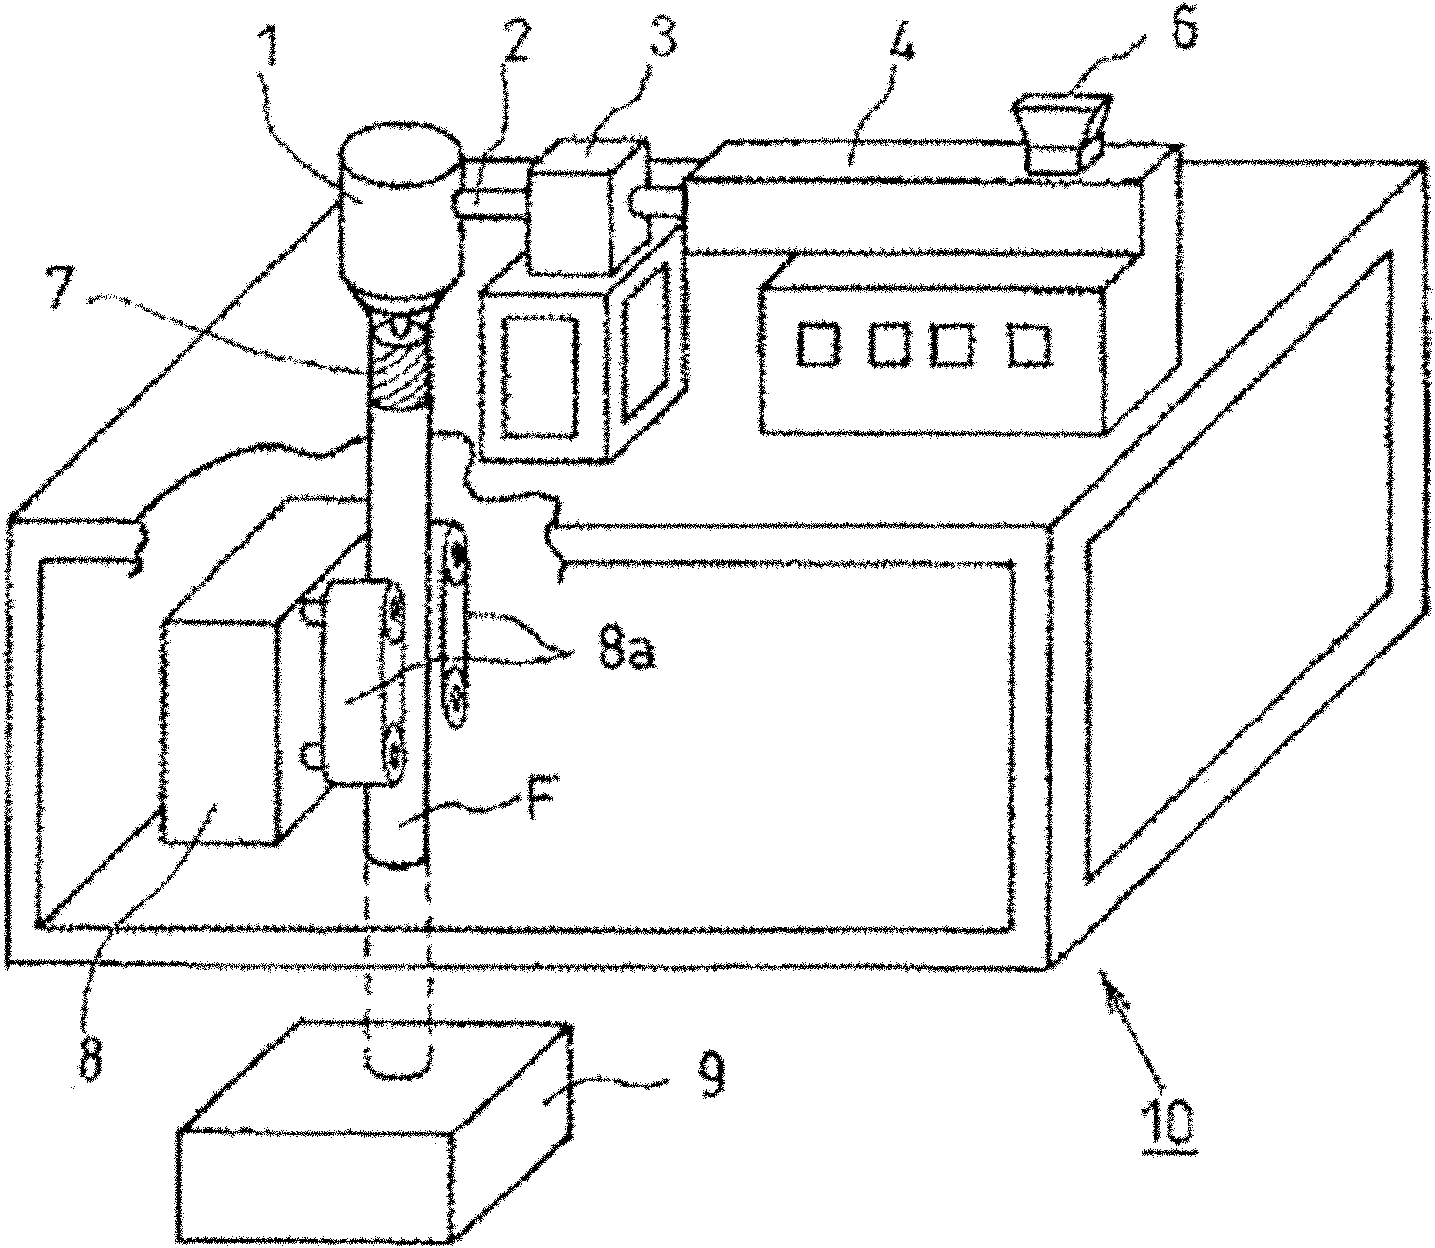 Seamless belt forming die and manufacturing method thereof